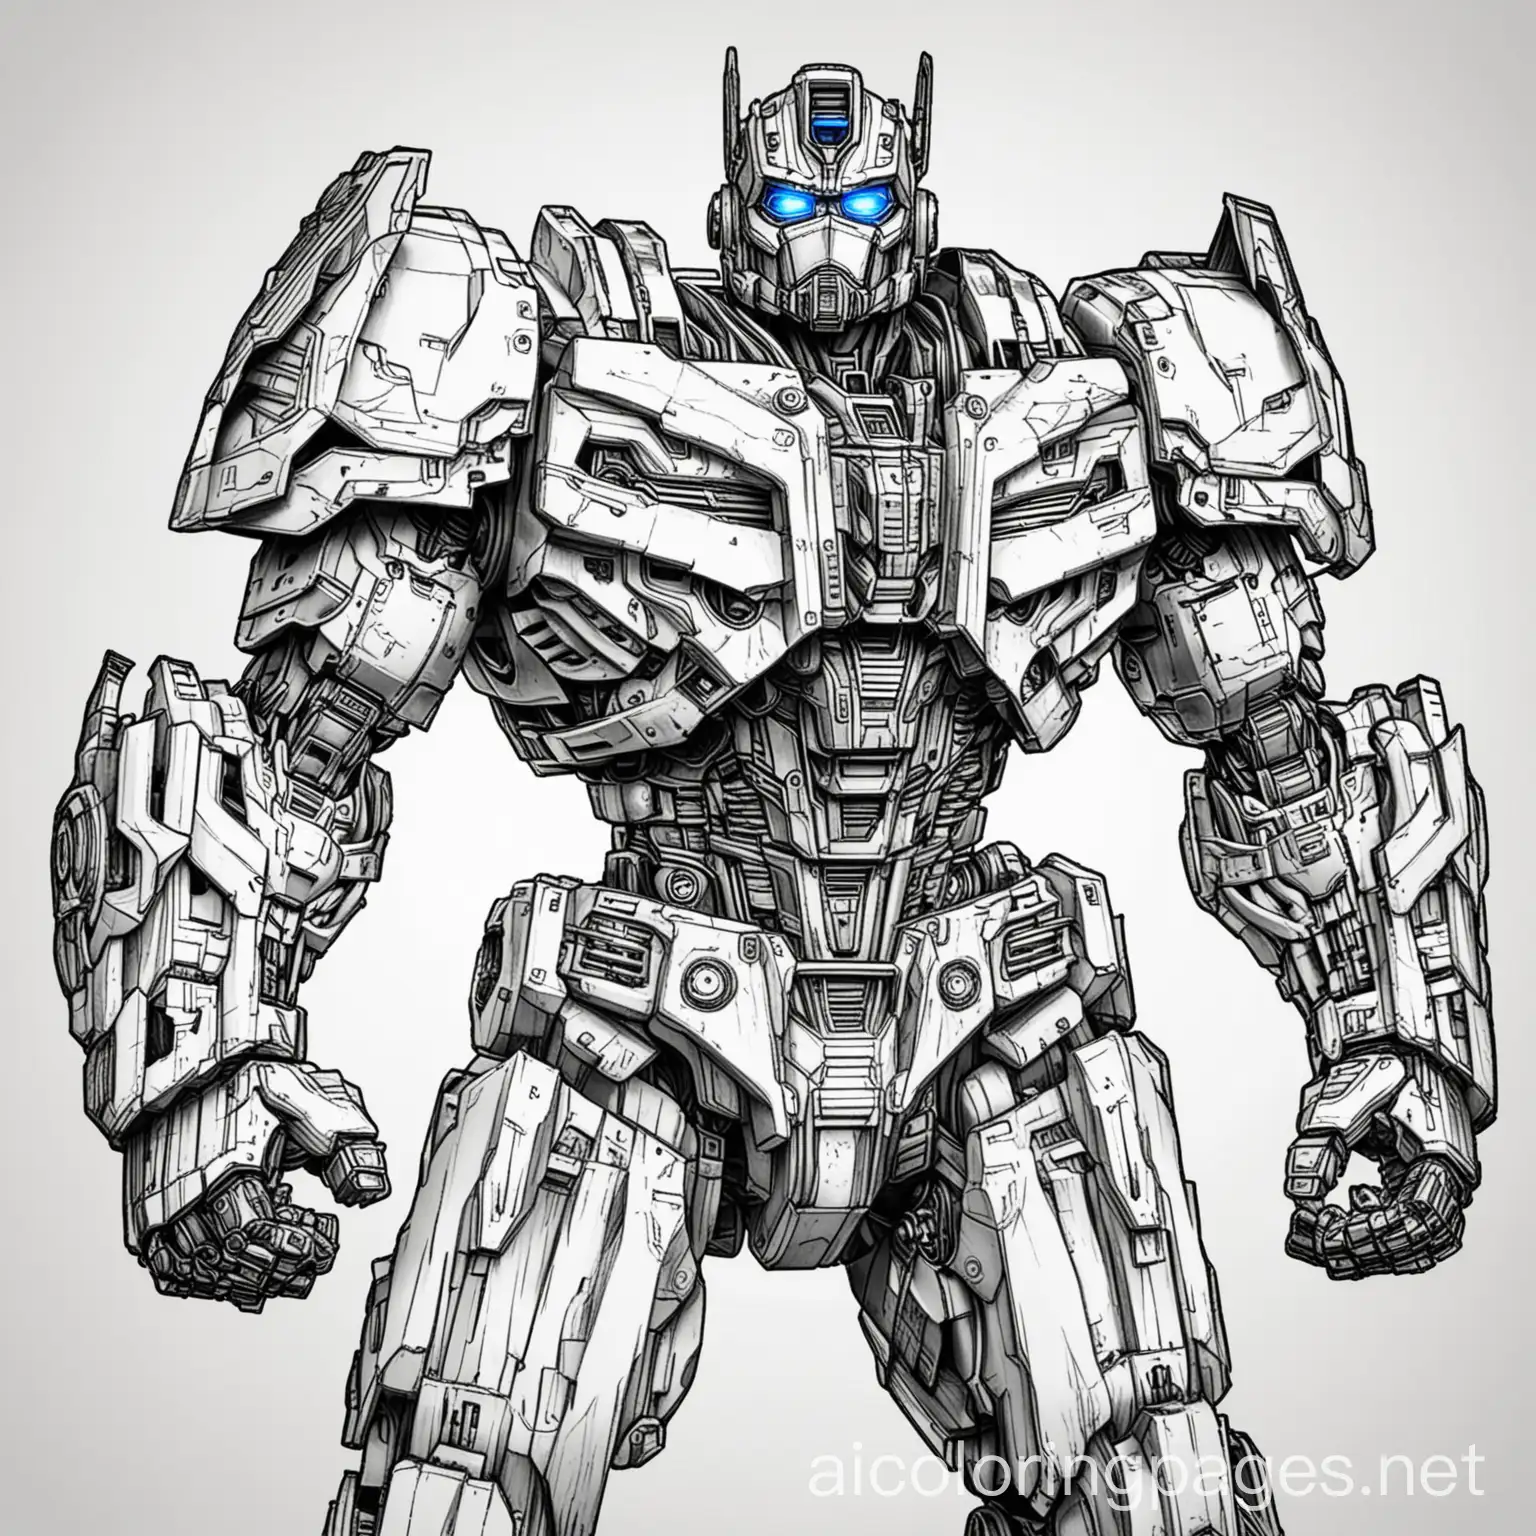 Transformers Coloring Book with a big image of Optimus Prime and Bumblebee., Coloring Page, black and white, line art, white background, Simplicity, Ample White Space. The background of the coloring page is plain white to make it easy for young children to color within the lines. The outlines of all the subjects are easy to distinguish, making it simple for kids to color without too much difficulty